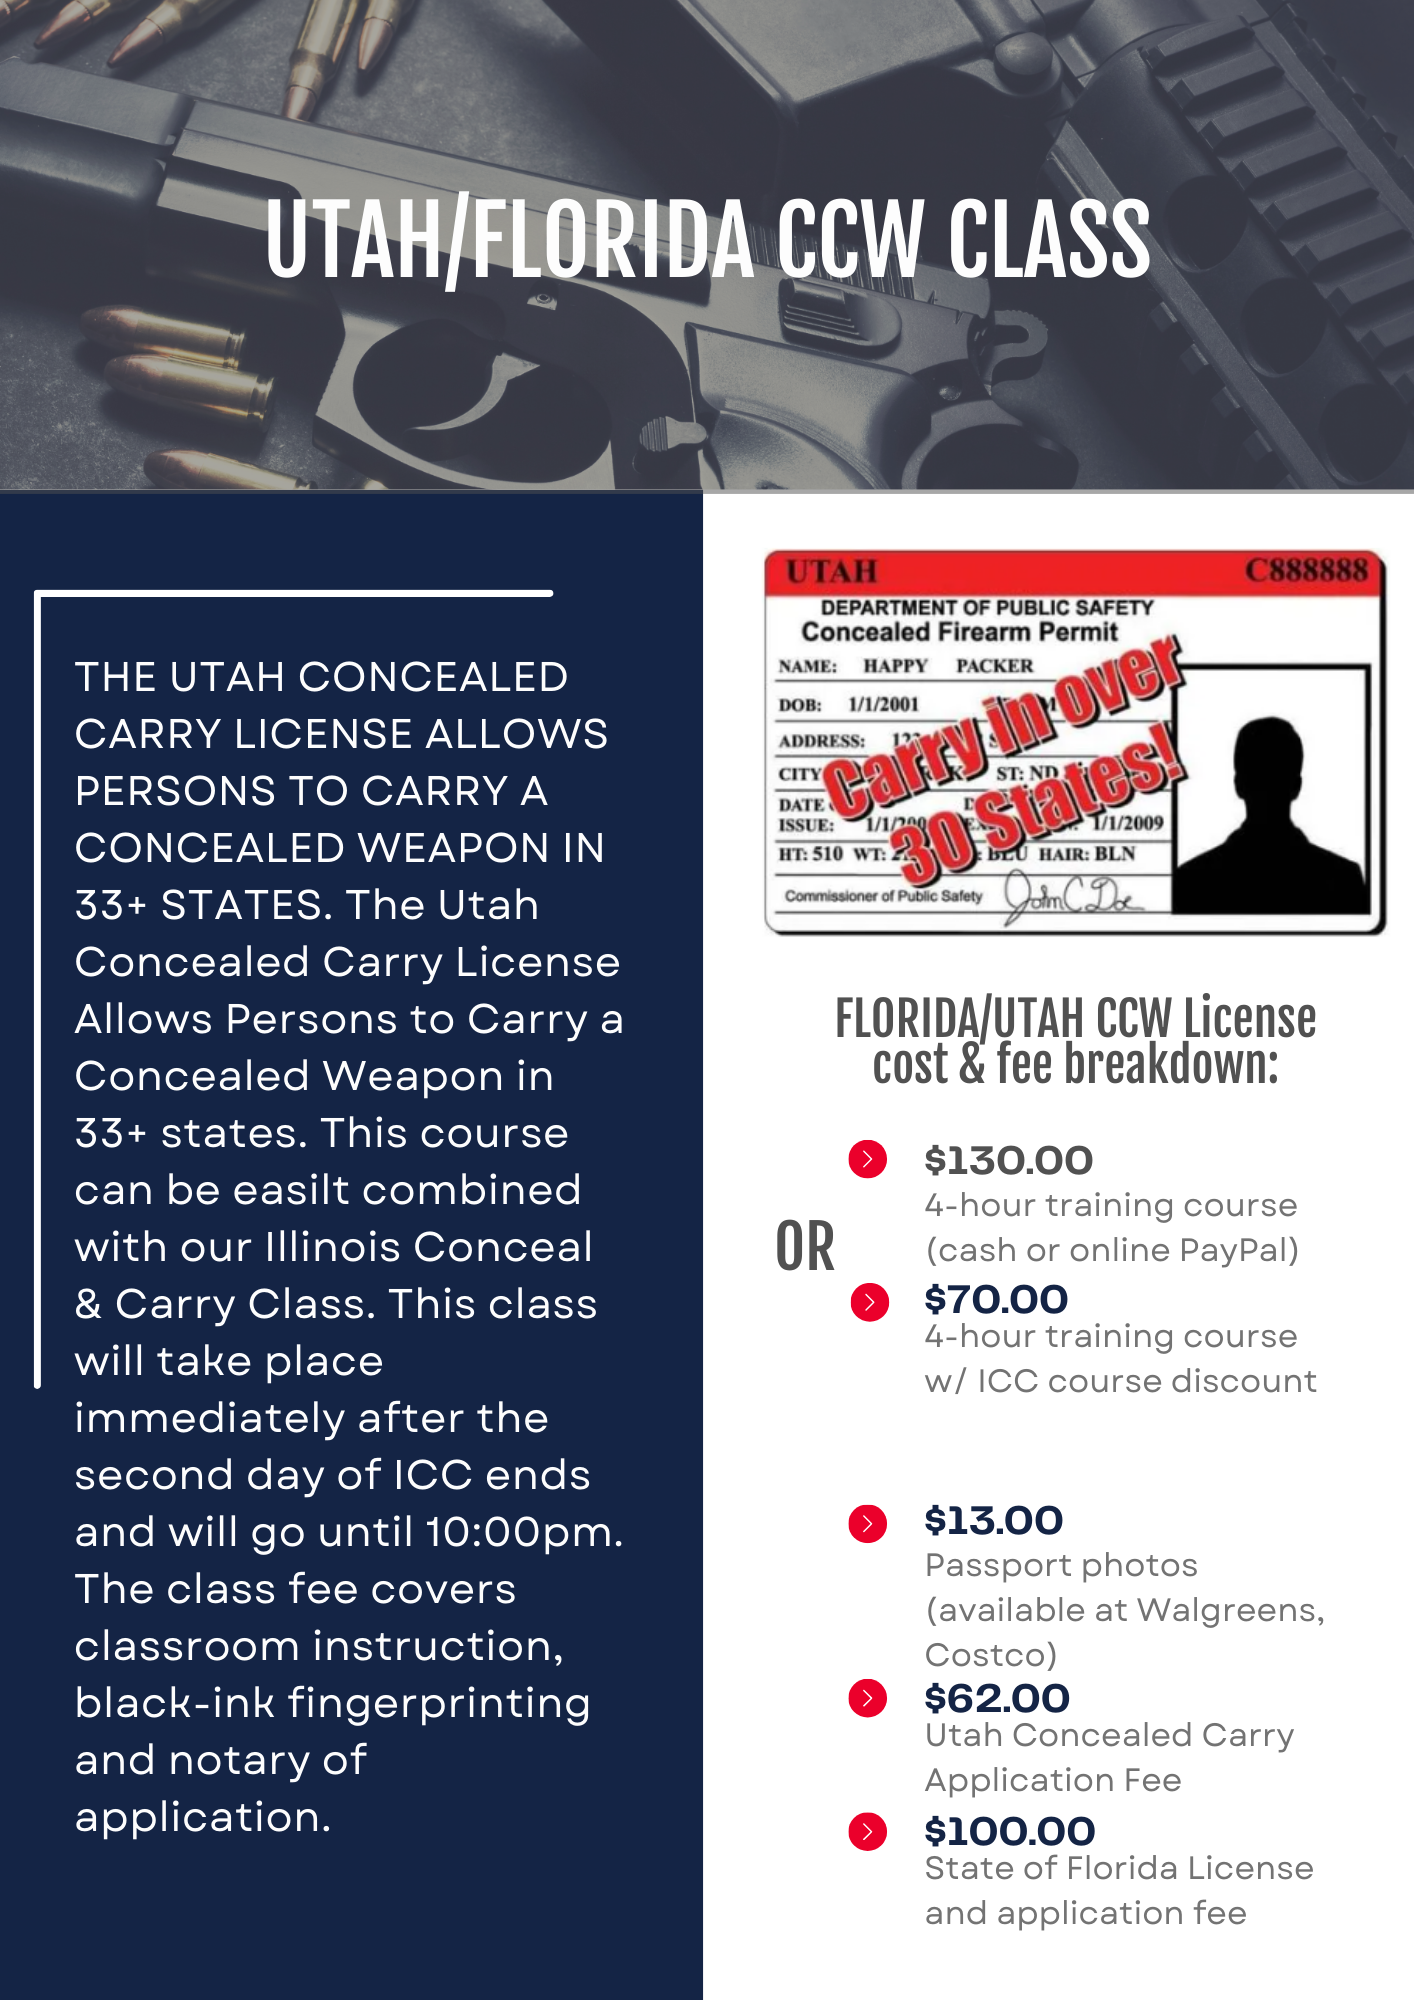 a flyer for utah / florida concealed carry class